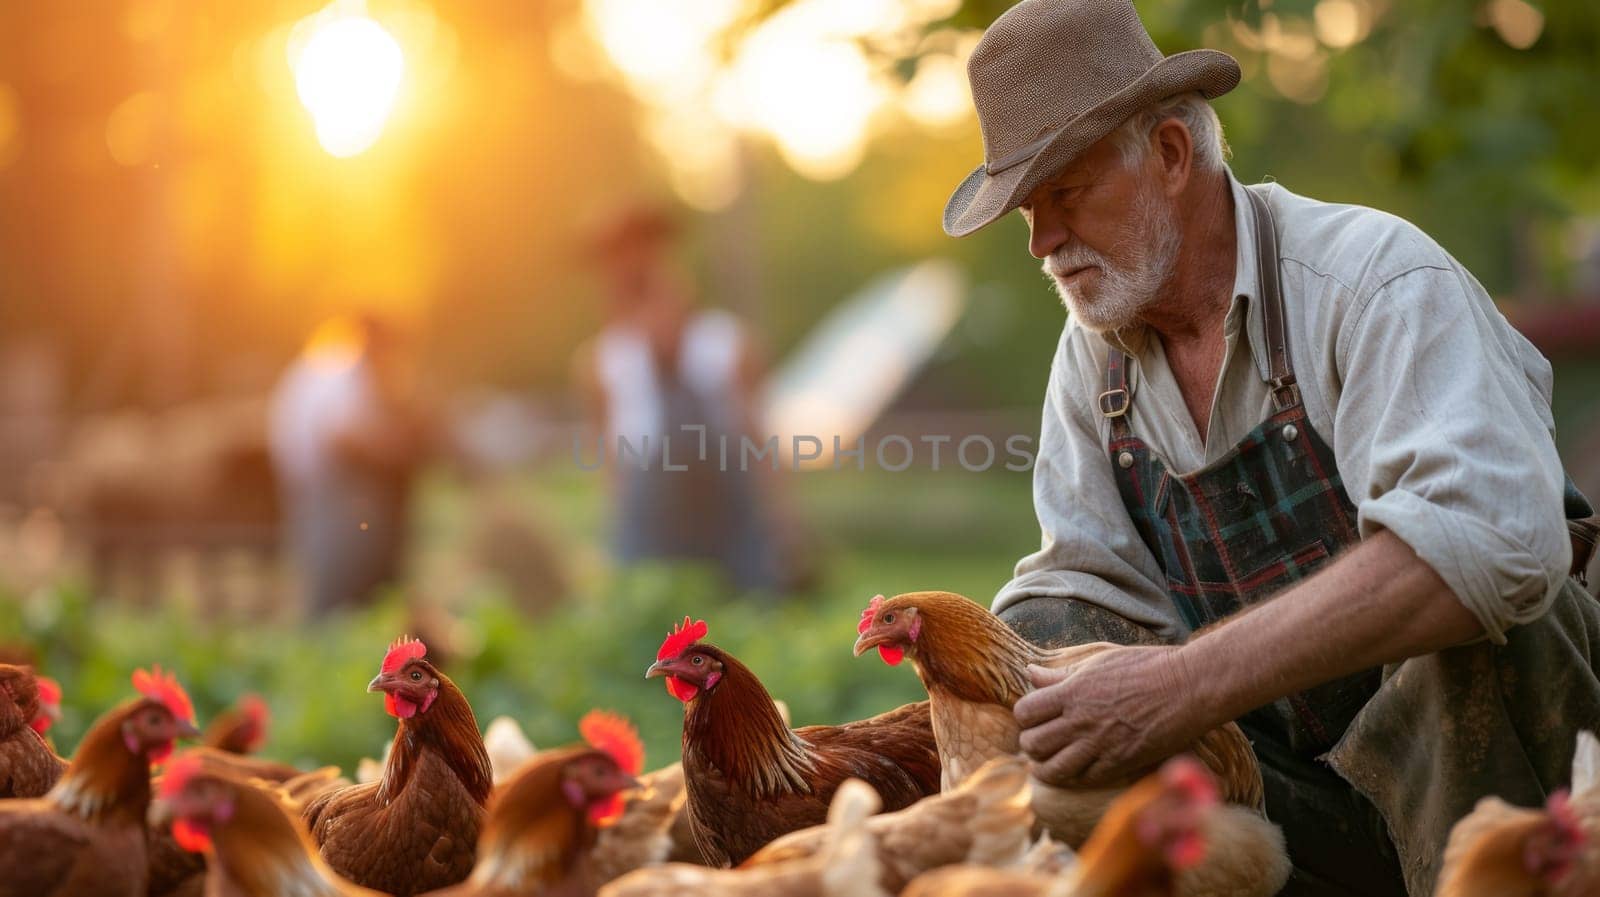 A man in hat and overalls tending to a flock of chickens